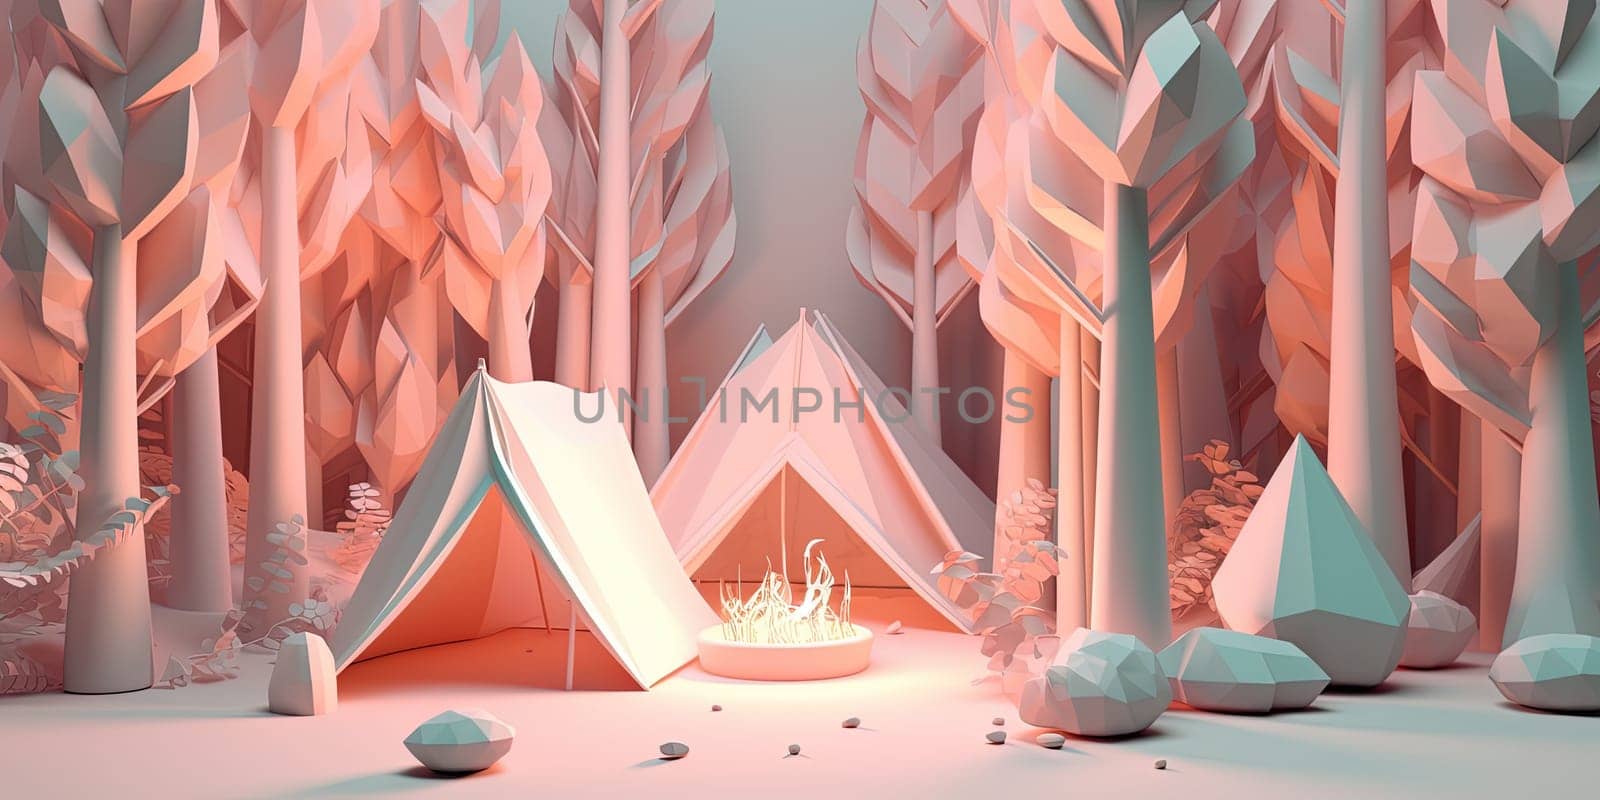 3D Illustration Tents In Forest And Bonfire At Night by tan4ikk1